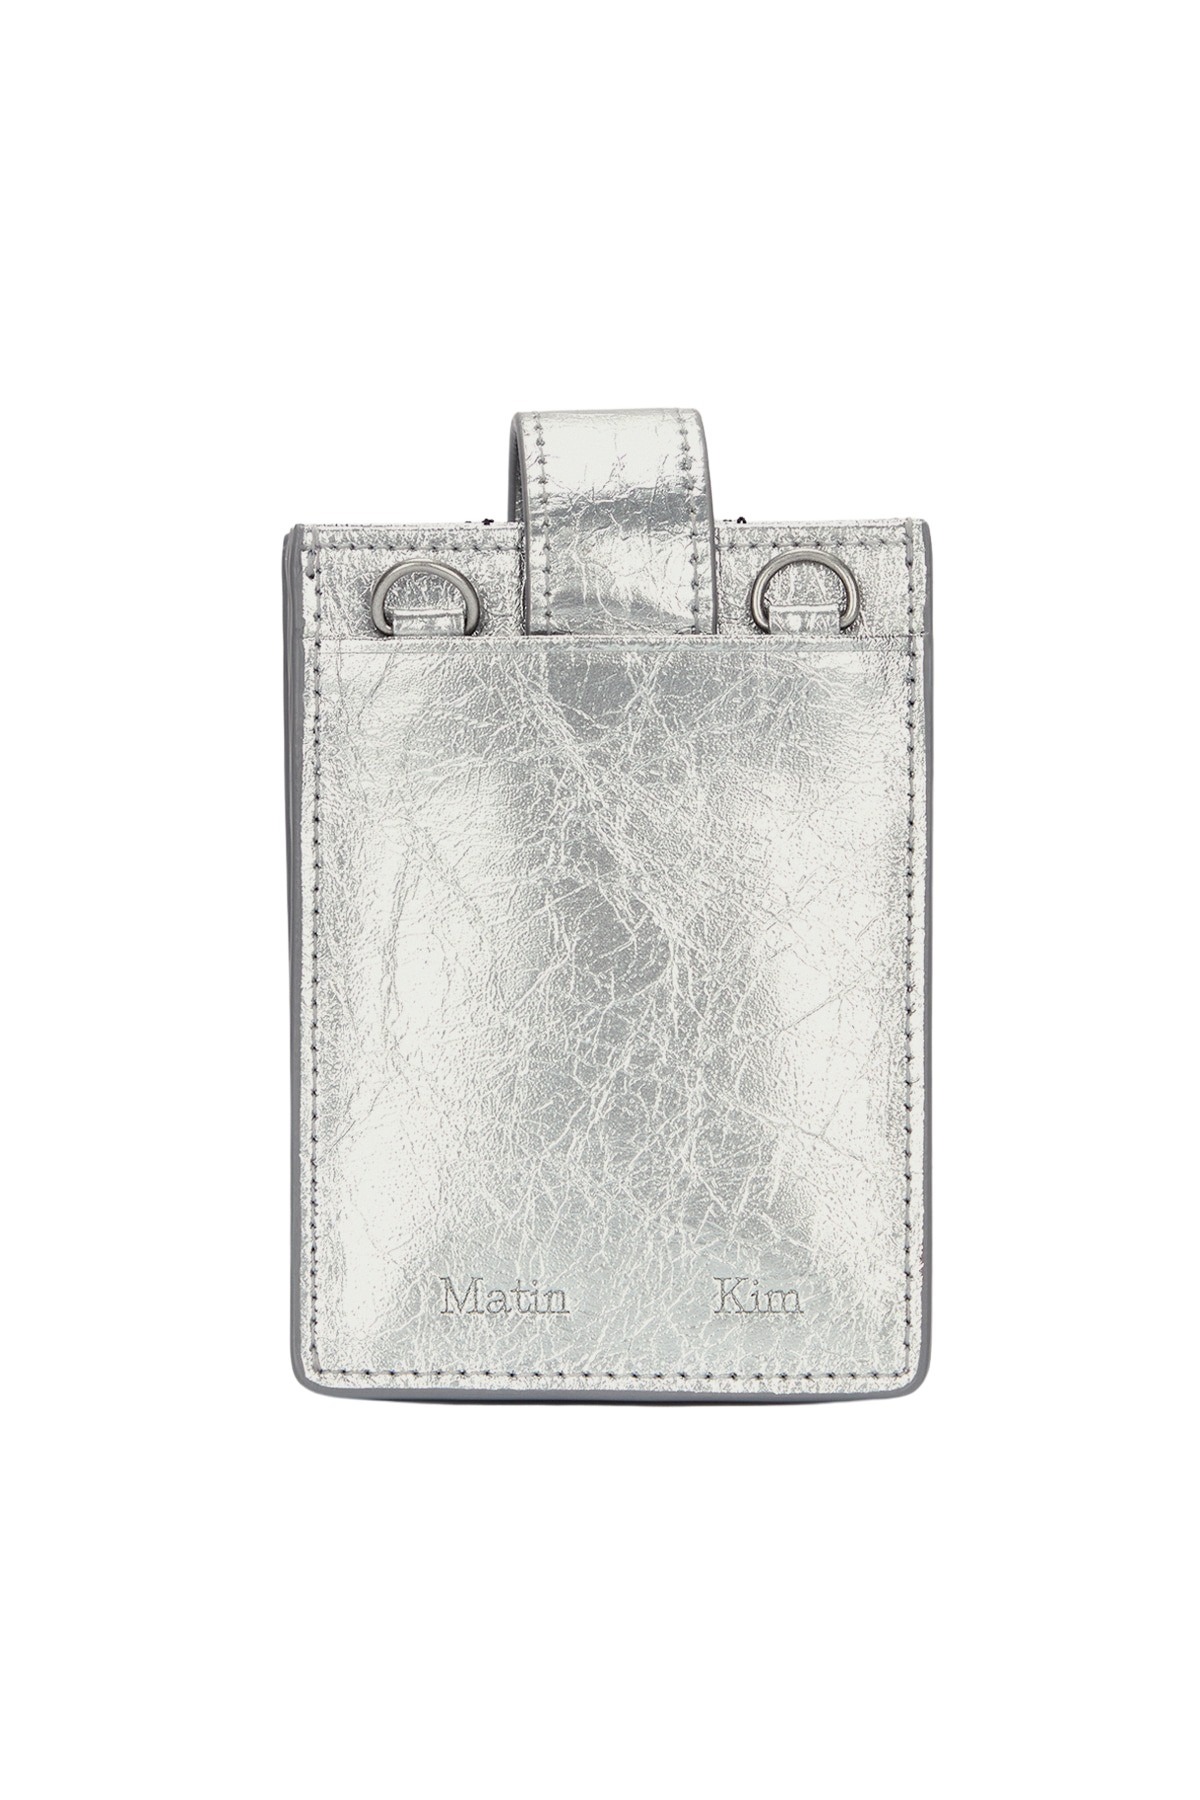 ACCORDION NECKLACE WALLET IN SILVER - MATINKIM